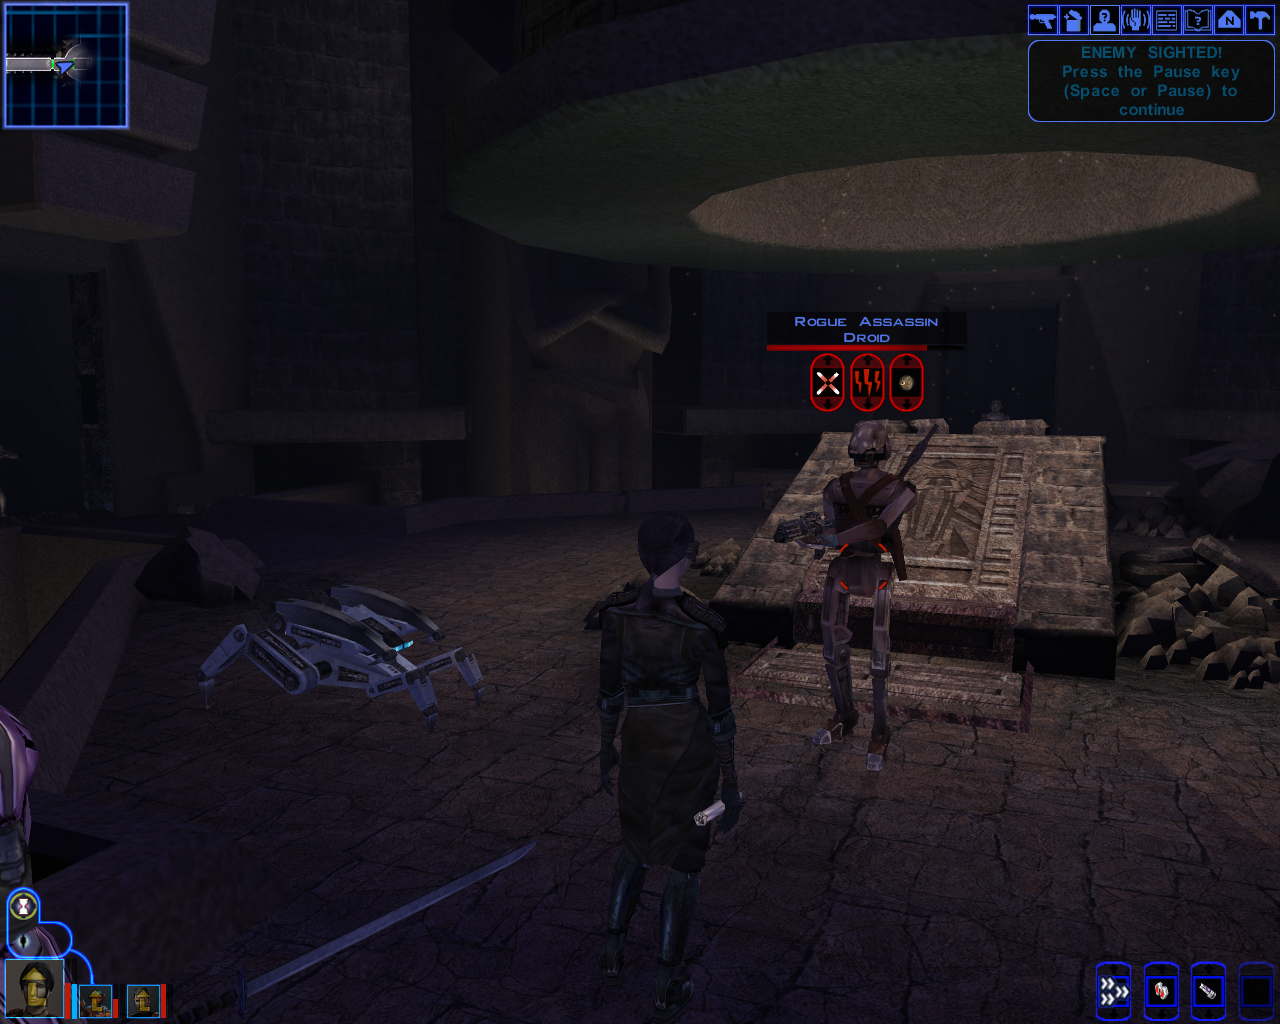 Rogue Assassin Droid in Tomb of Marka Ragnos